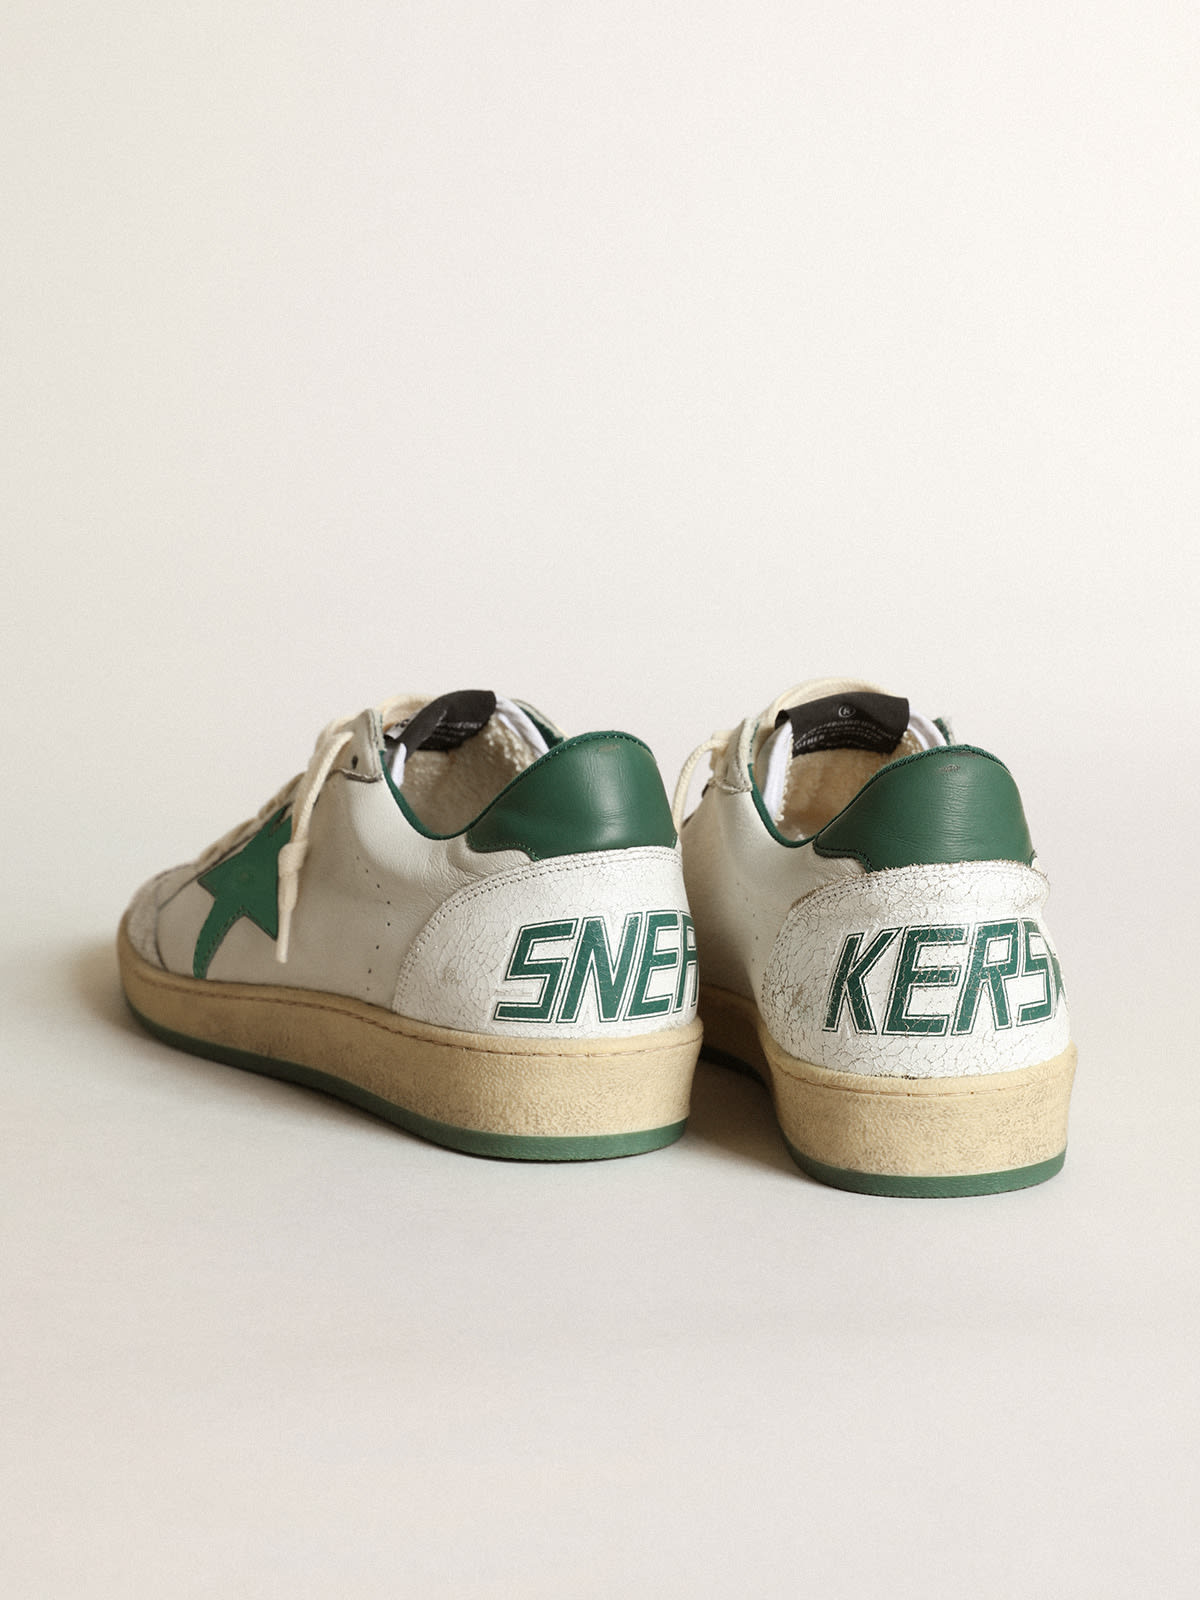 Golden Goose - Men's Ball Star in white nappa leather with green leather star and heel tab in 